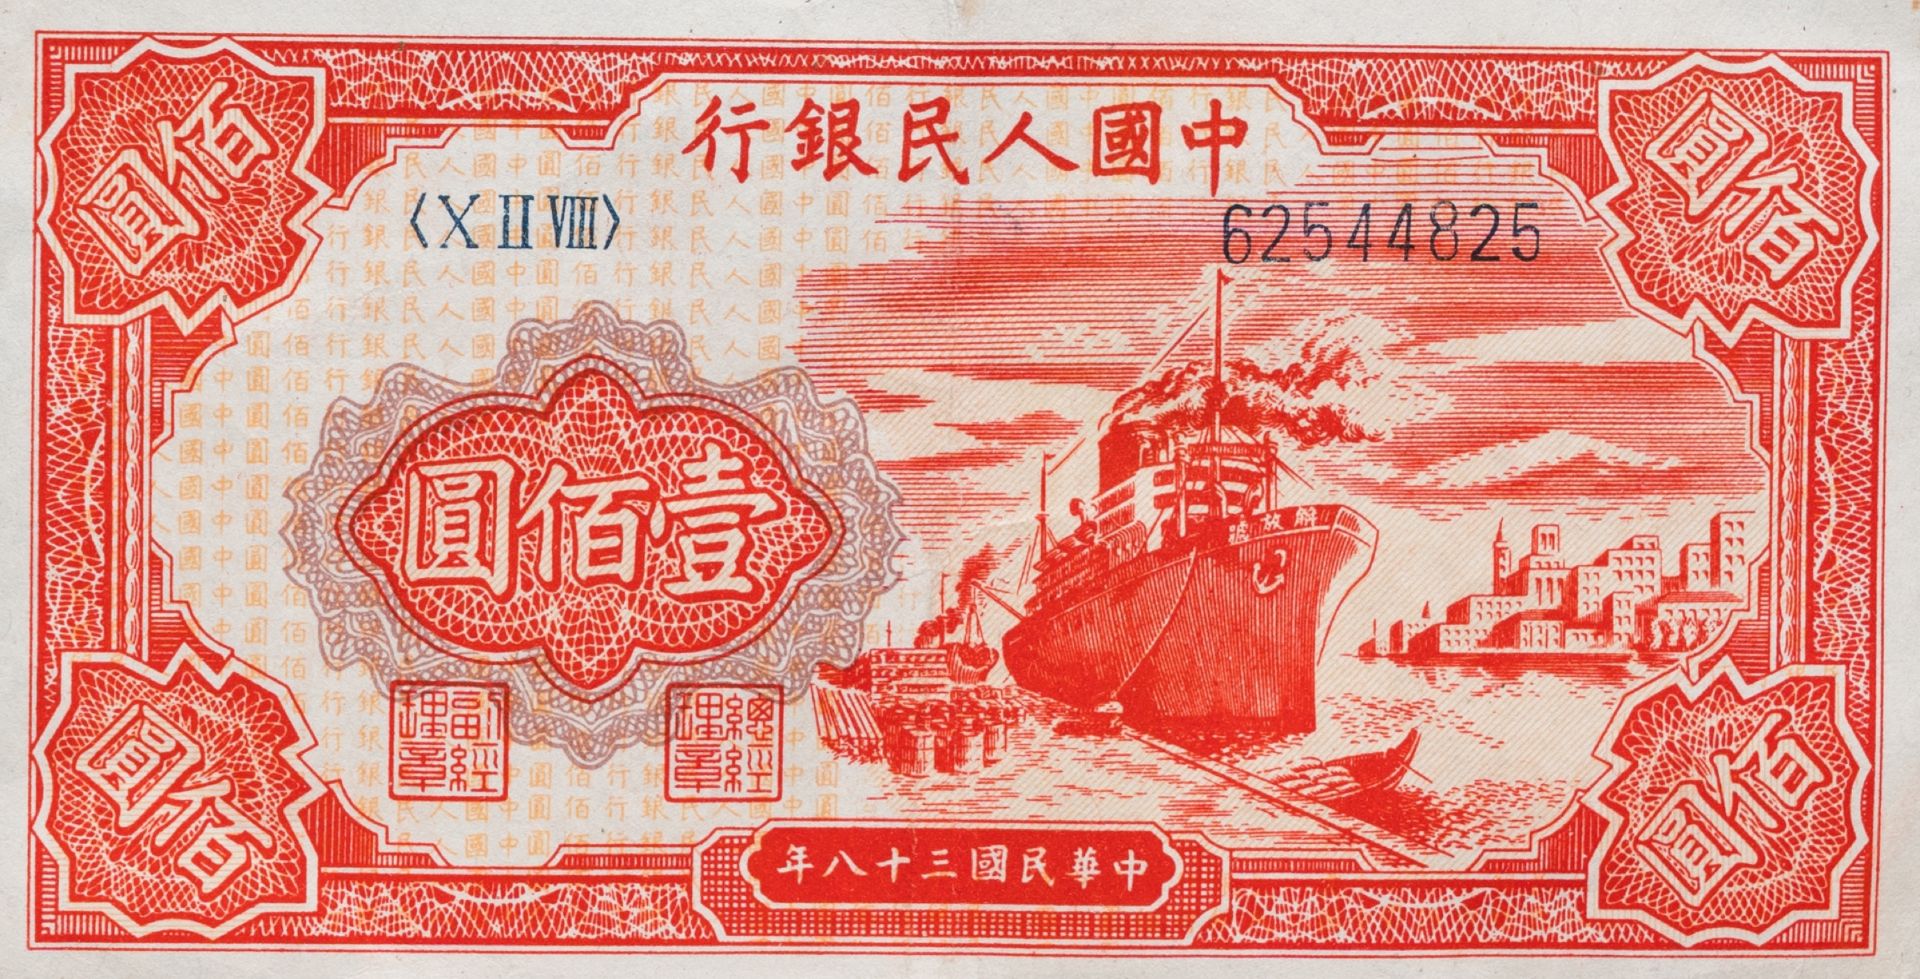 A Chinese 100 Yuan bank note issued in 1949 - Image 3 of 4